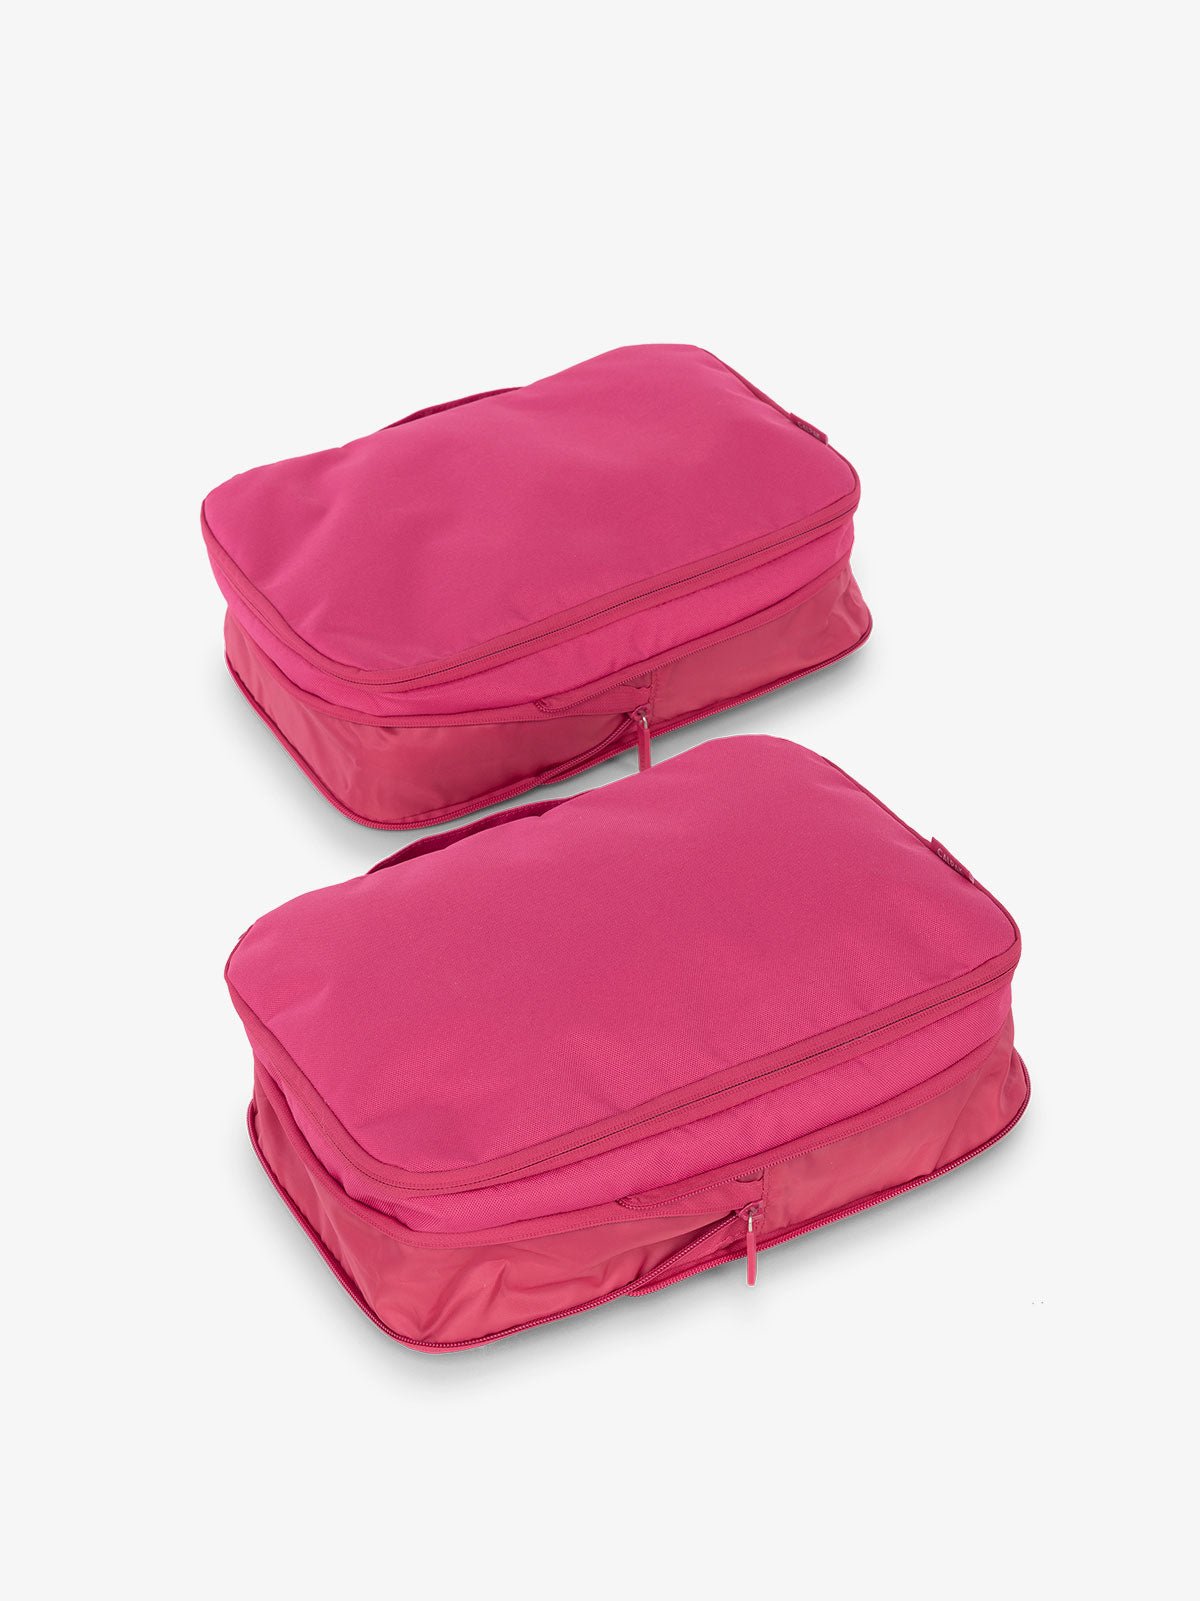 CALPAK compression packing cubes with top handles in pink